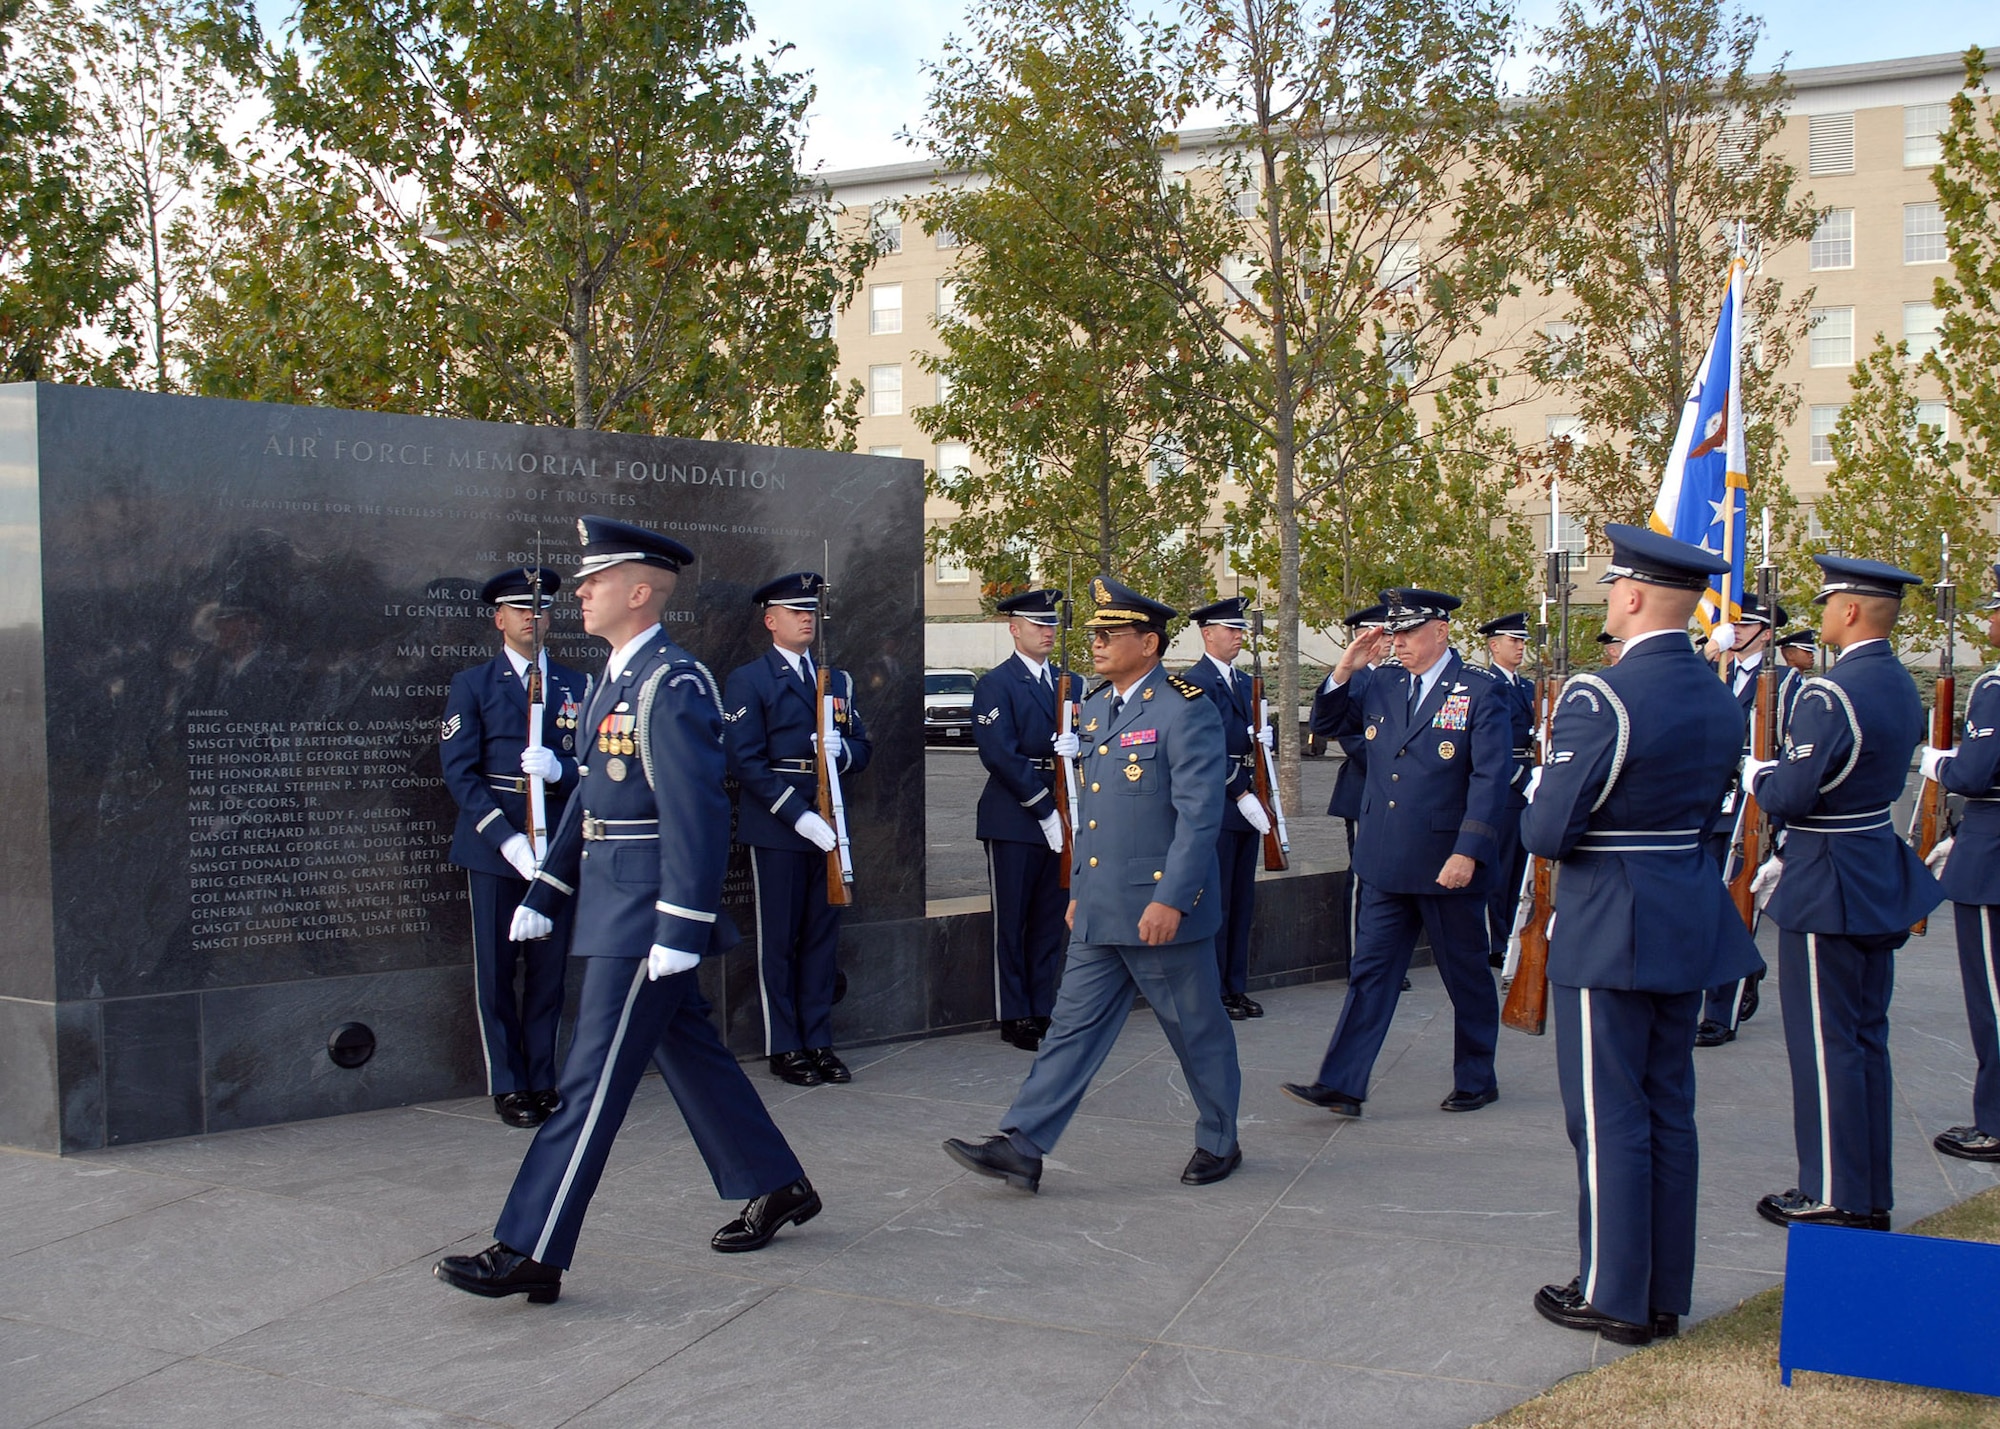 1st Lt. John Shirley from the Air Force Honor Guard escorts Chief of Staff of the Air Force Gen. T. Michael Moseley and Lt. Gen. Soeung Samnang, Cambodian Royal Air Force commander, to their positions during a foreign dignitary arrival and wreath laying ceremony Tuesday, Oct. 24, 2006, at the Air Force Memorial. (U.S. Air Force photo/Staff Sgt. Madelyn Waychoff)